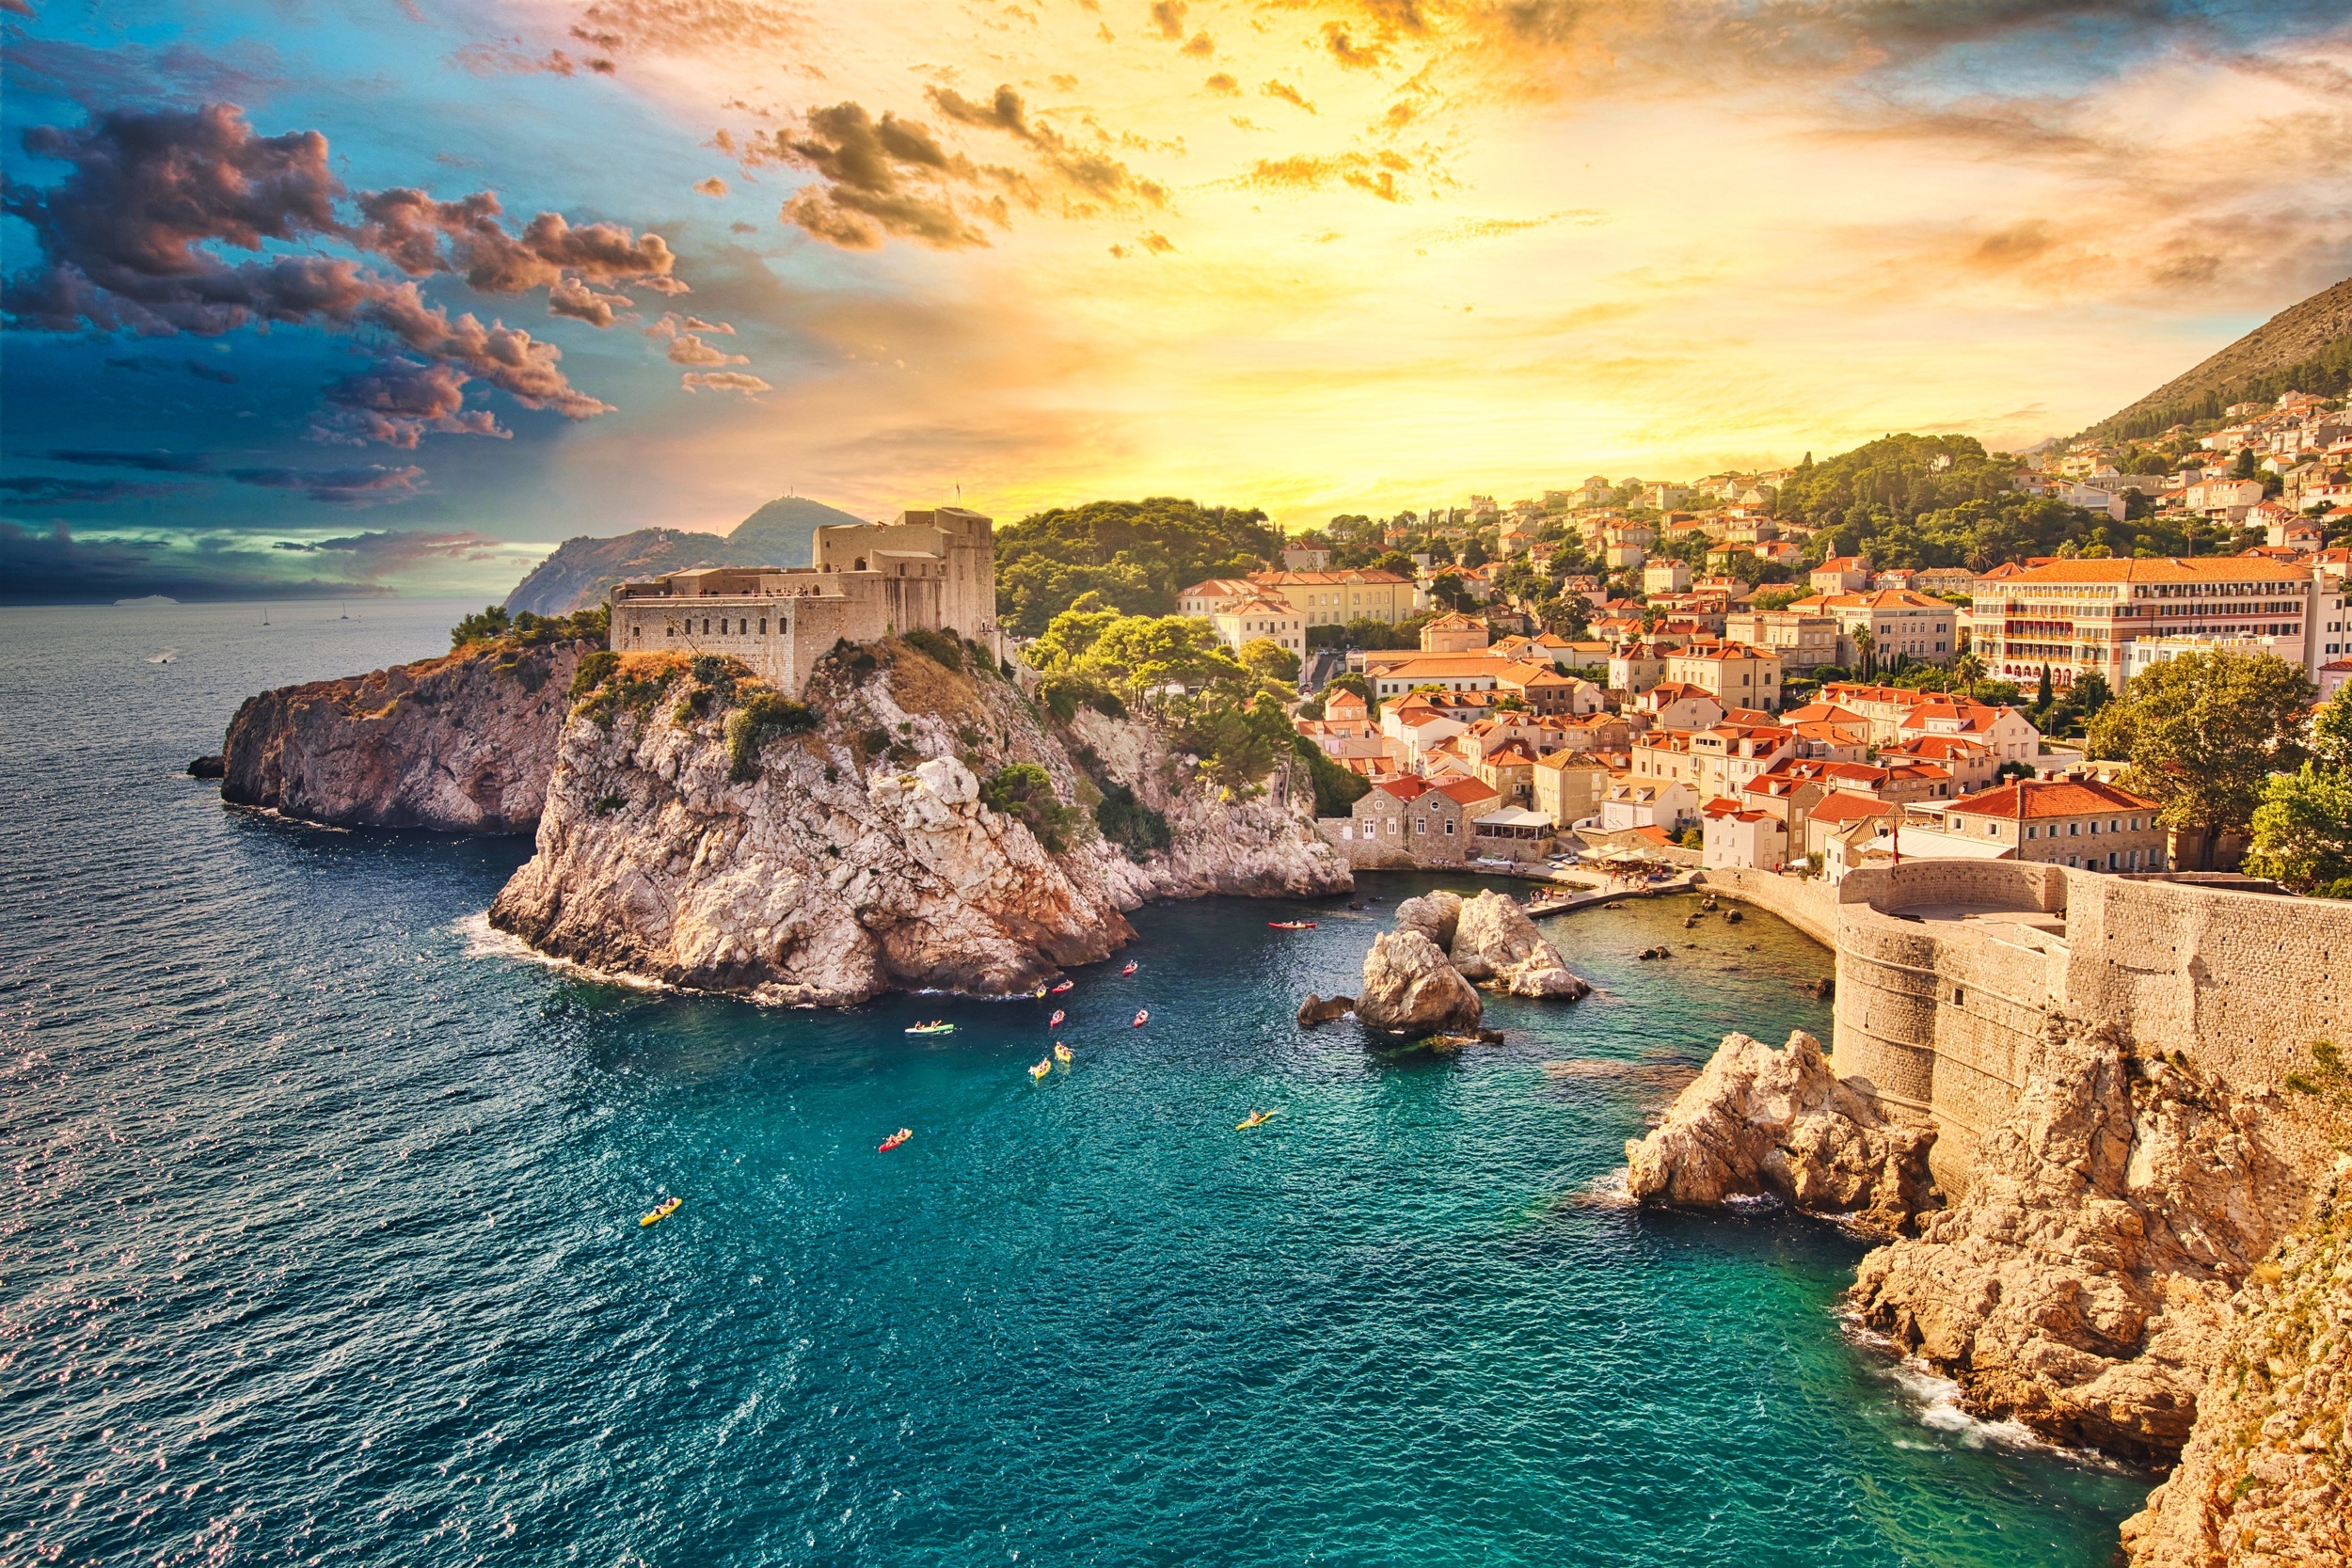 <p>This list, of course, couldn’t have been completed without mentioning arguably the most famous destination in the Balkans. <em>Game of Thrones</em> ensured the city is now on every traveler’s wishlist, so while you won’t ever have Dubrovnik to yourself, it’s still worth a visit. Enjoy views from atop the city walls, kayak around the hidden coves, and have dinner in the magical Old Town. </p><p>You may also like: <a href='https://www.yardbarker.com/lifestyle/articles/22_dessert_recipes_you_can_make_with_an_air_fryer/s1__38513880'>22 dessert recipes you can make with an air fryer</a></p>